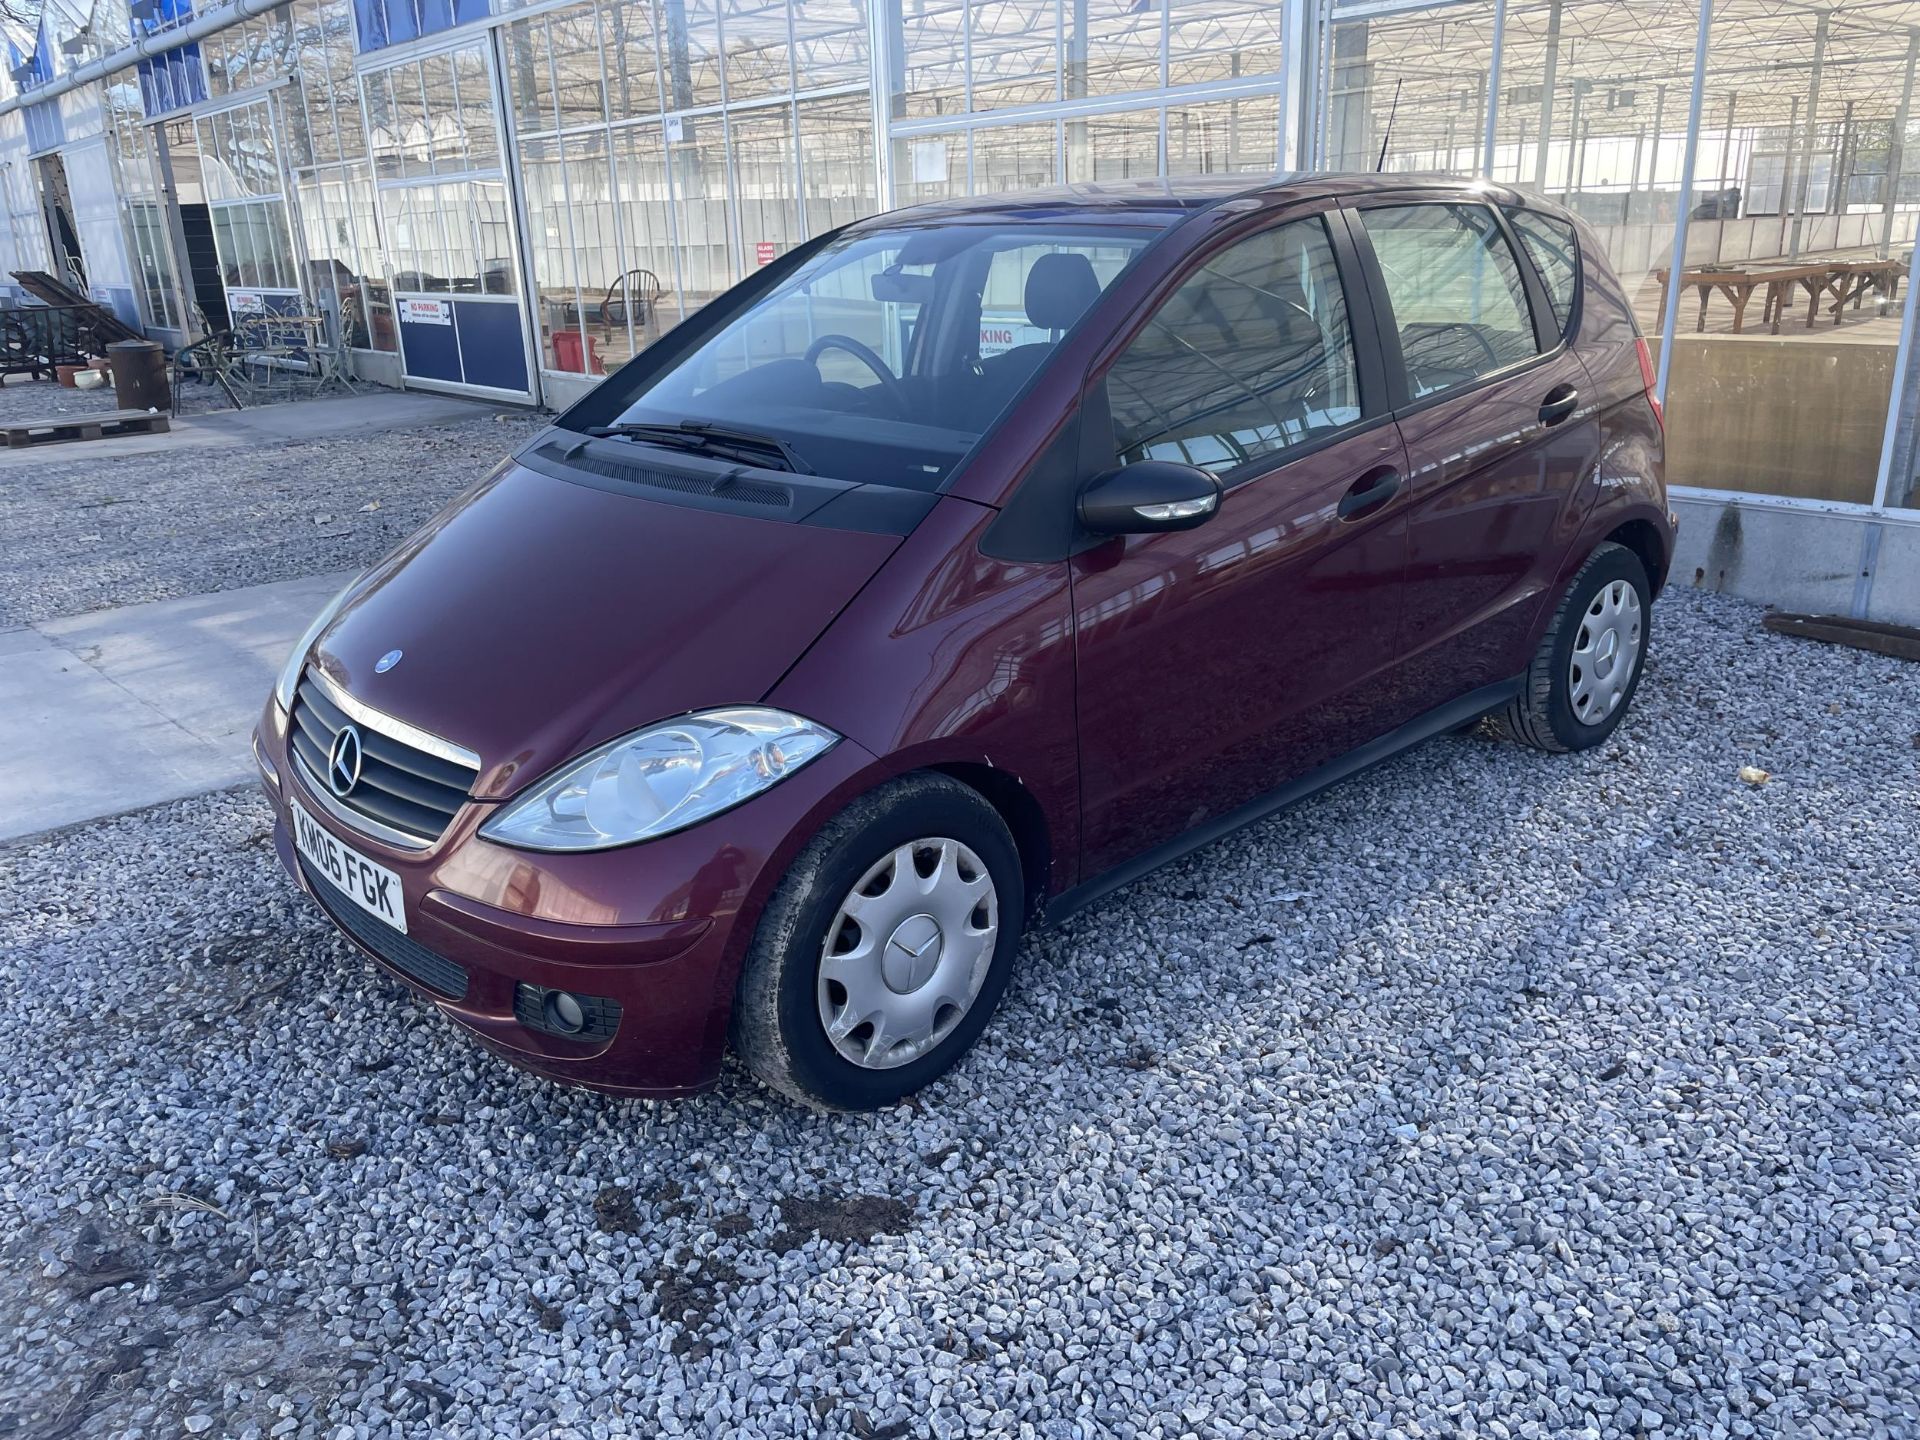 A 2006 MERCEDES A180 CDI CLASSIC FIVE DOOR DIESEL HATCHBACK CAR, AUTOMATIC TRANSMISSION, 103908 - Image 2 of 19